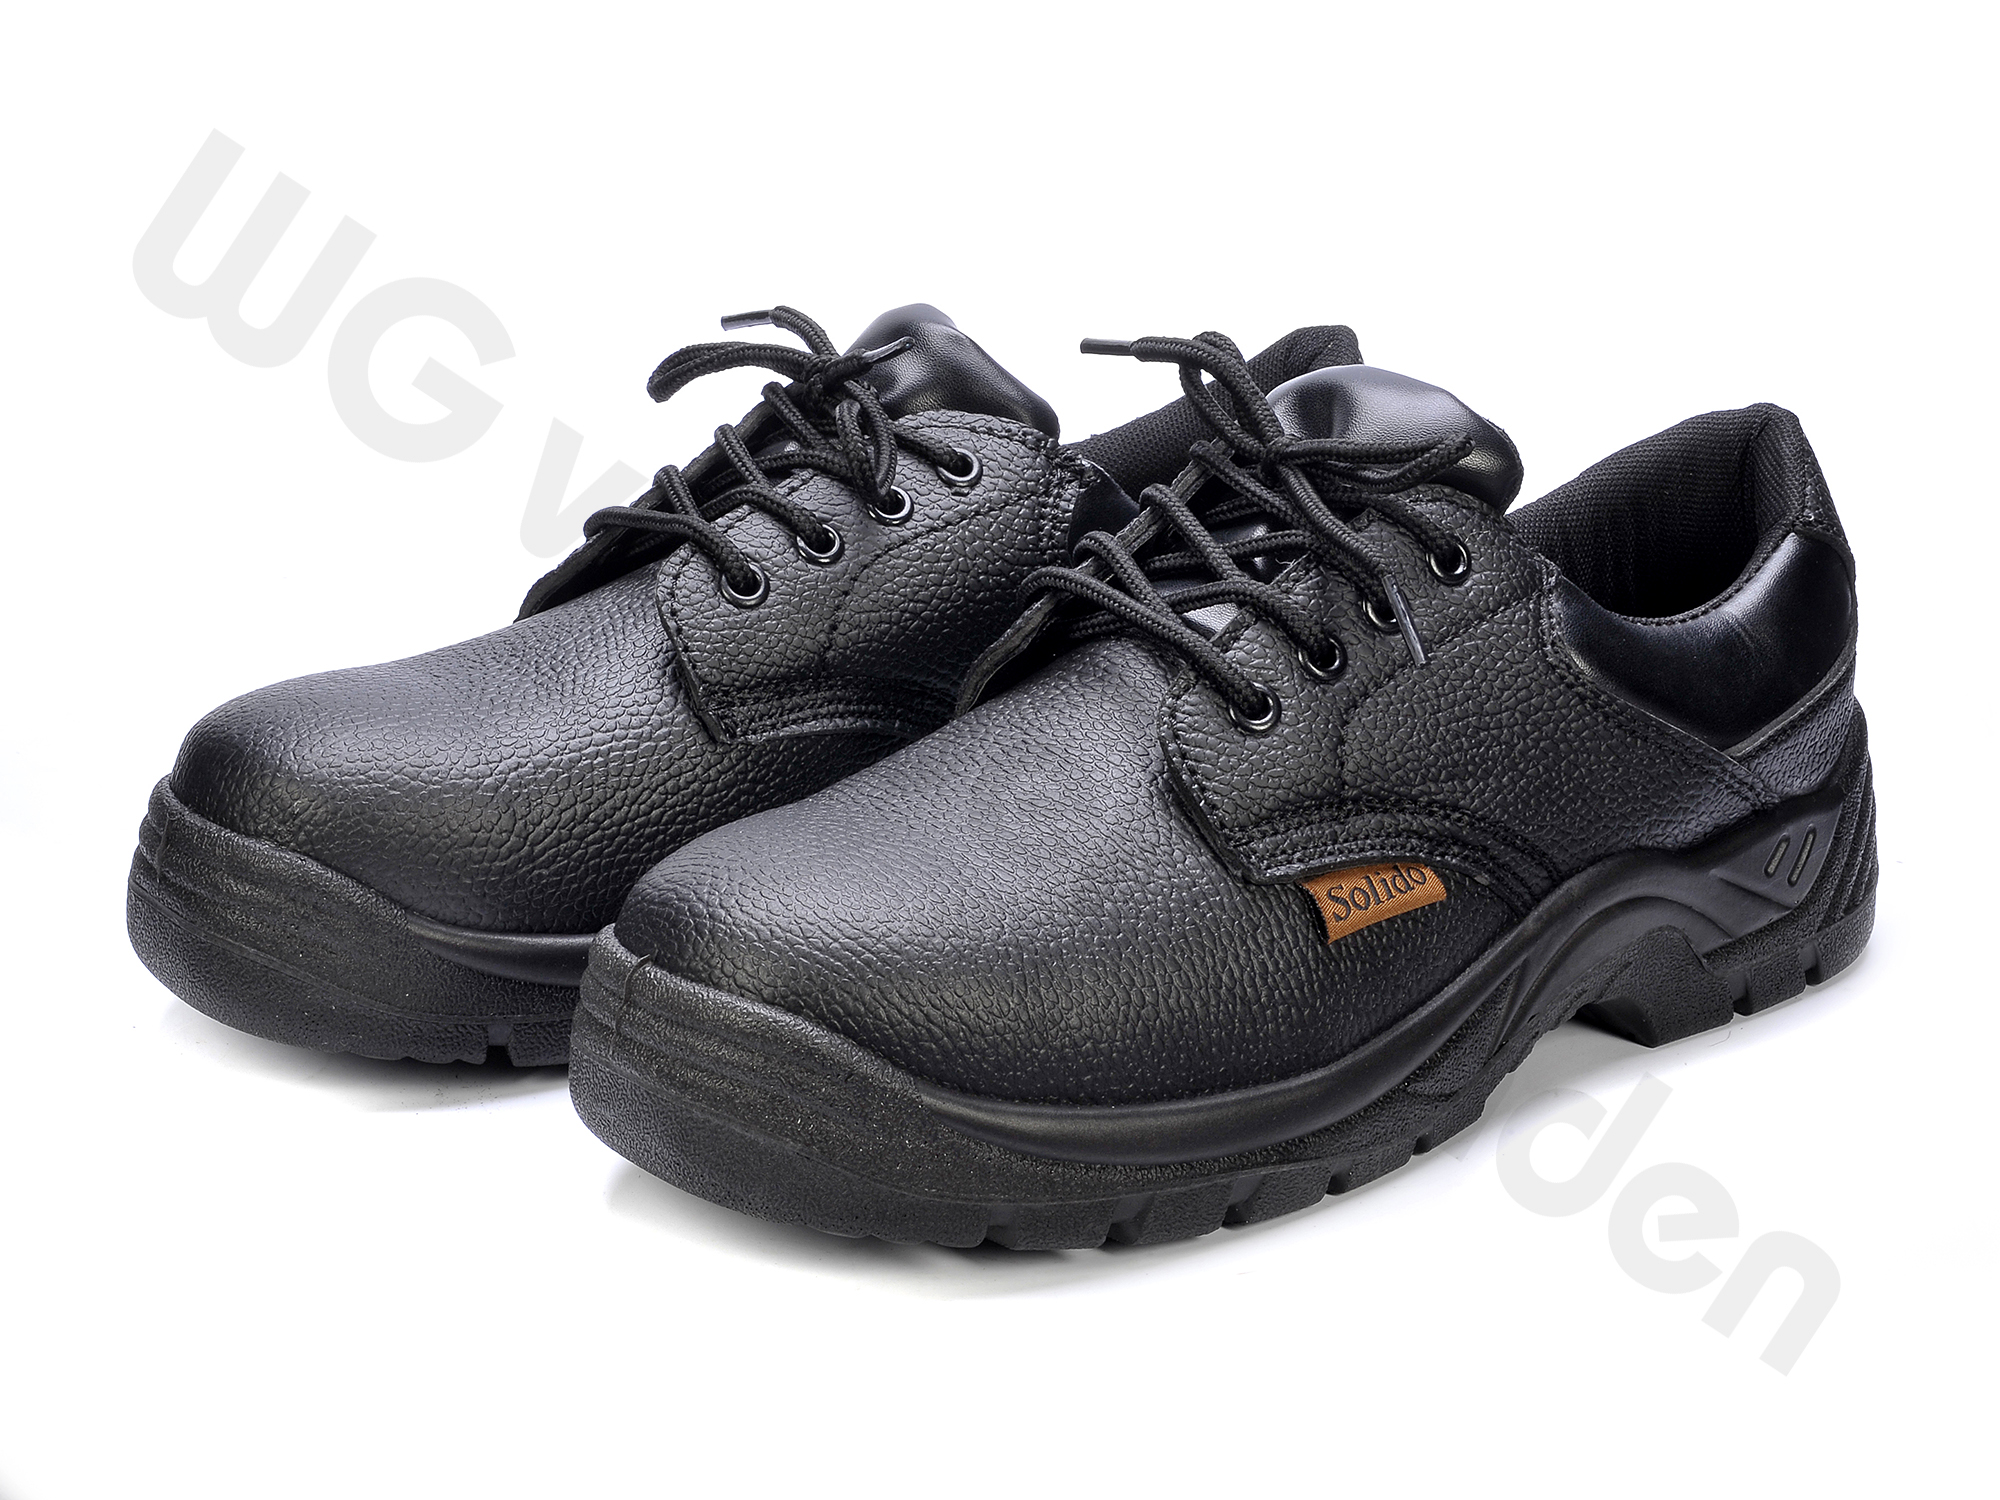 880612 SHOES SAFETY S1 WITH STEEL TOE SIZE 49 / 31CM CE